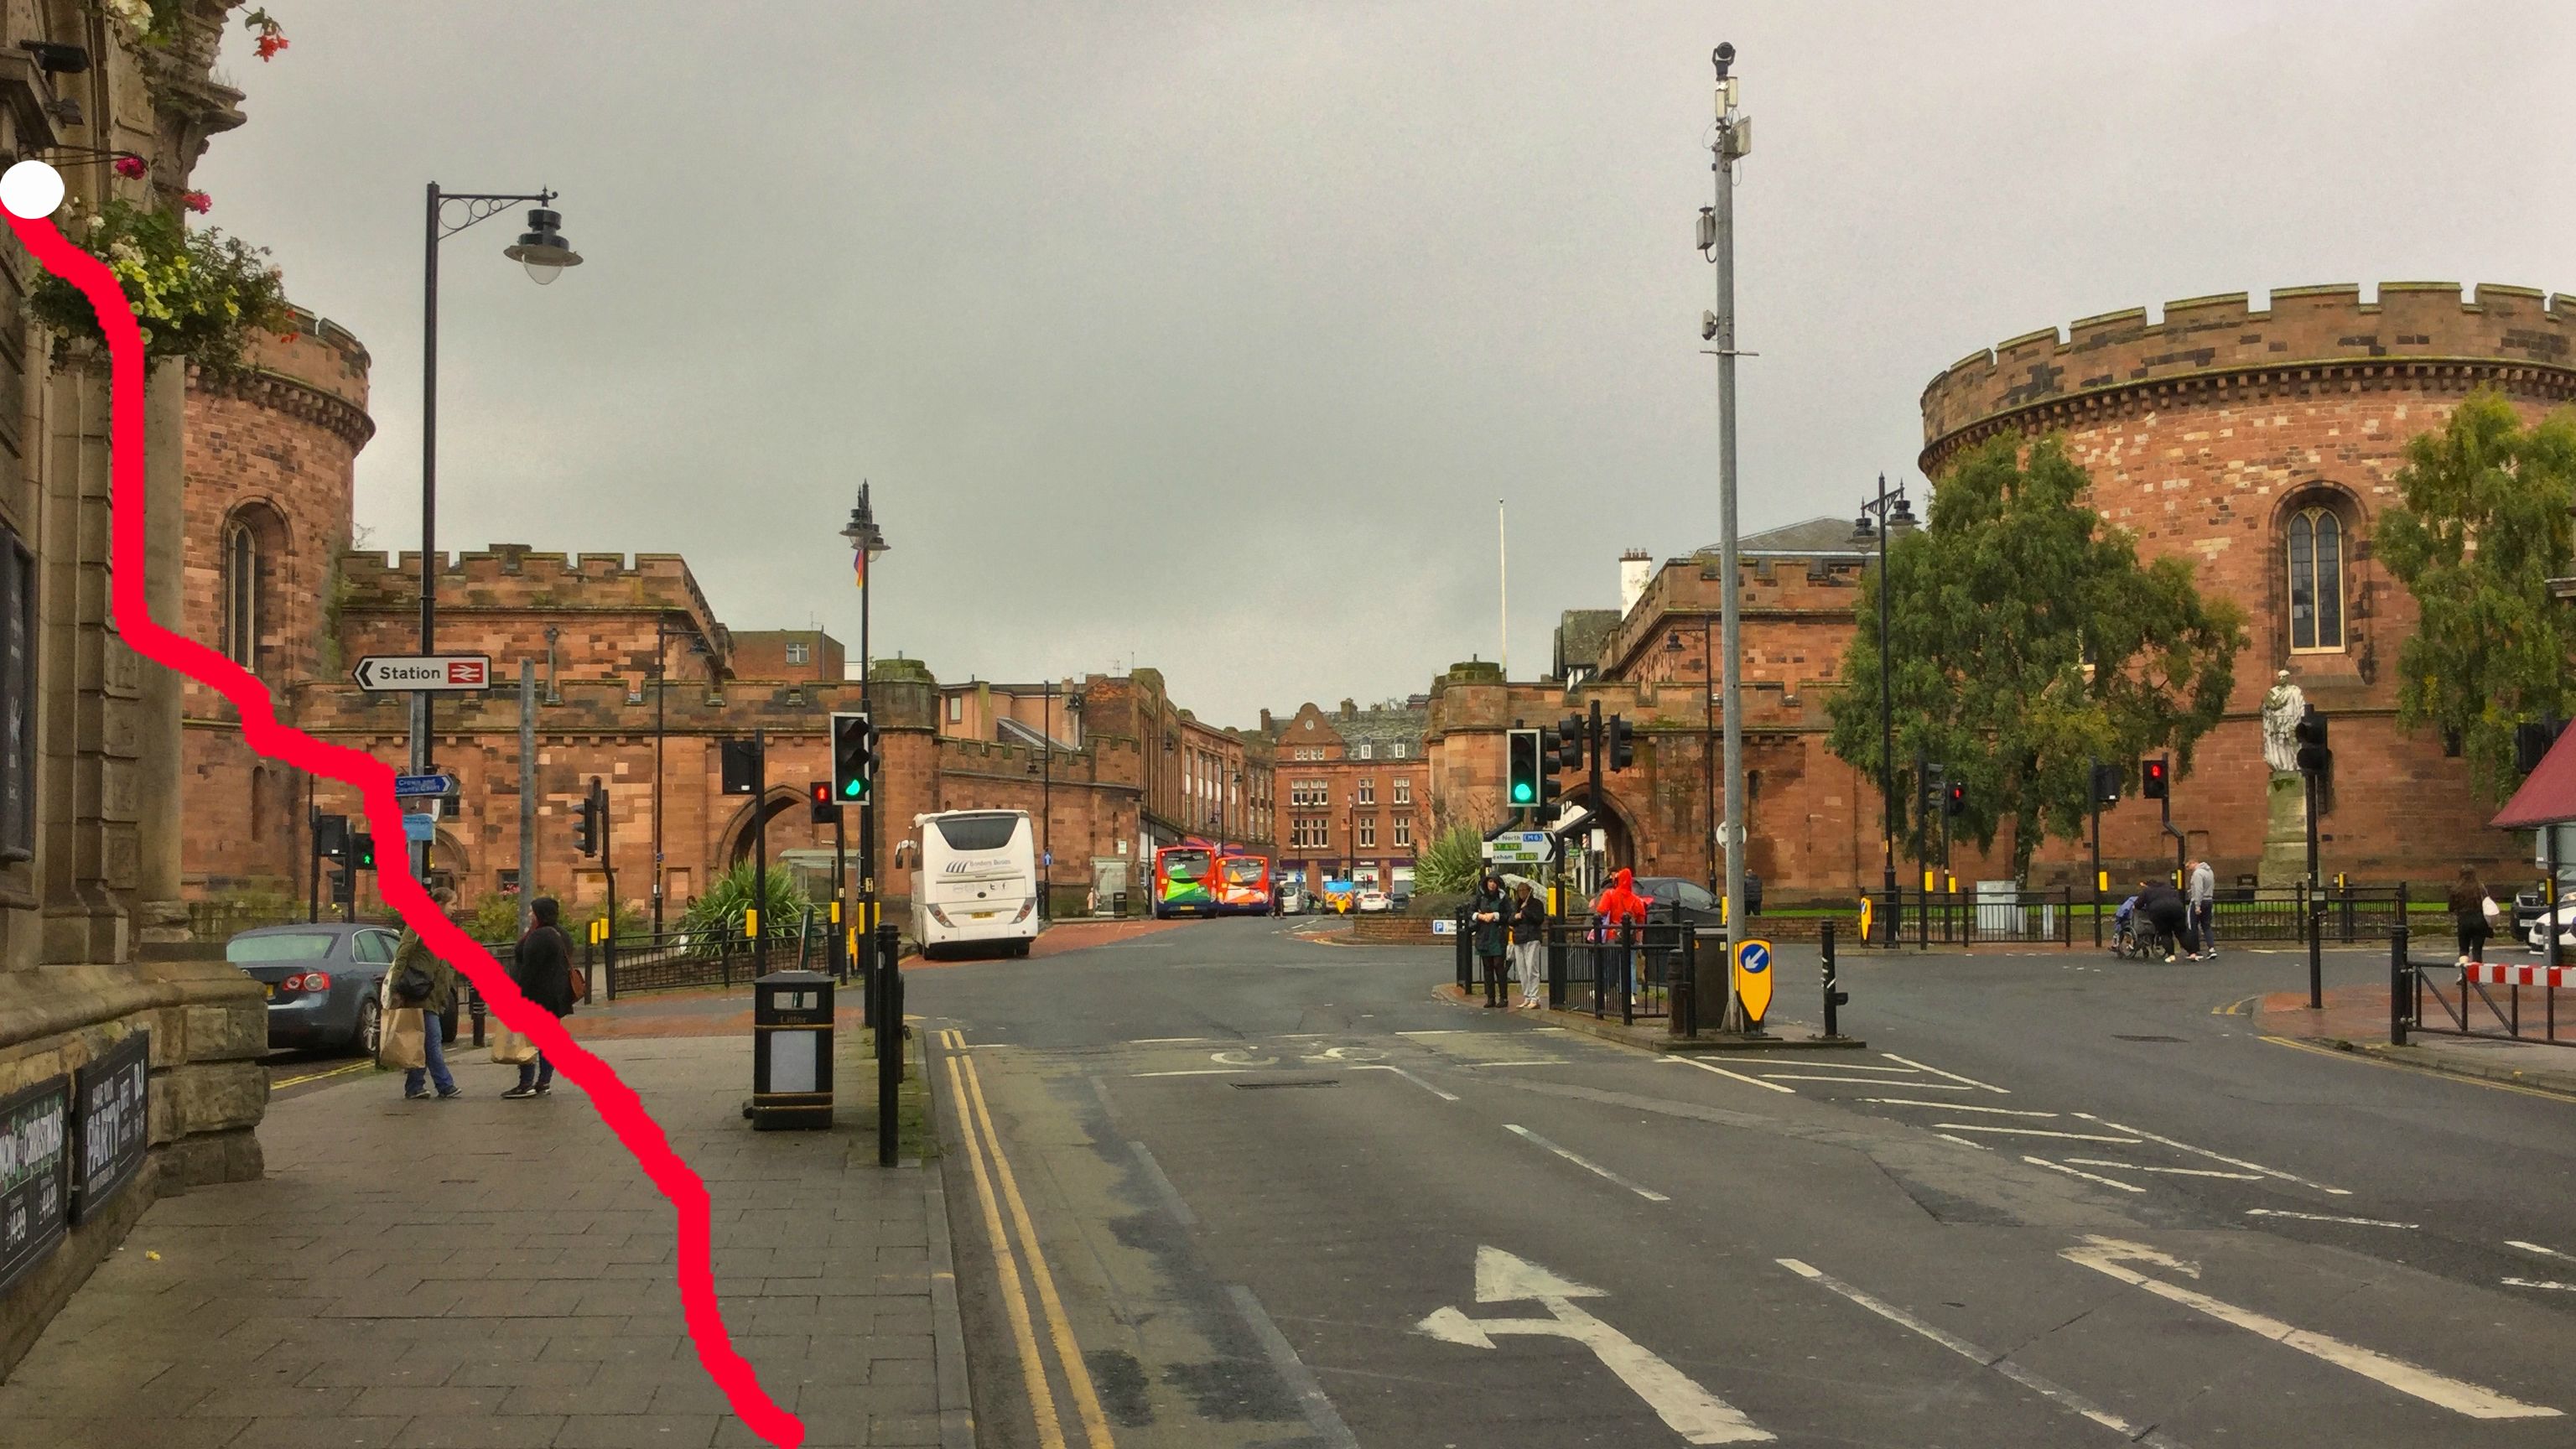 The road junction where the A6 ends - Carlisle City Centre is pedestrianised and beyond it the A7 stretches towards Edinburgh